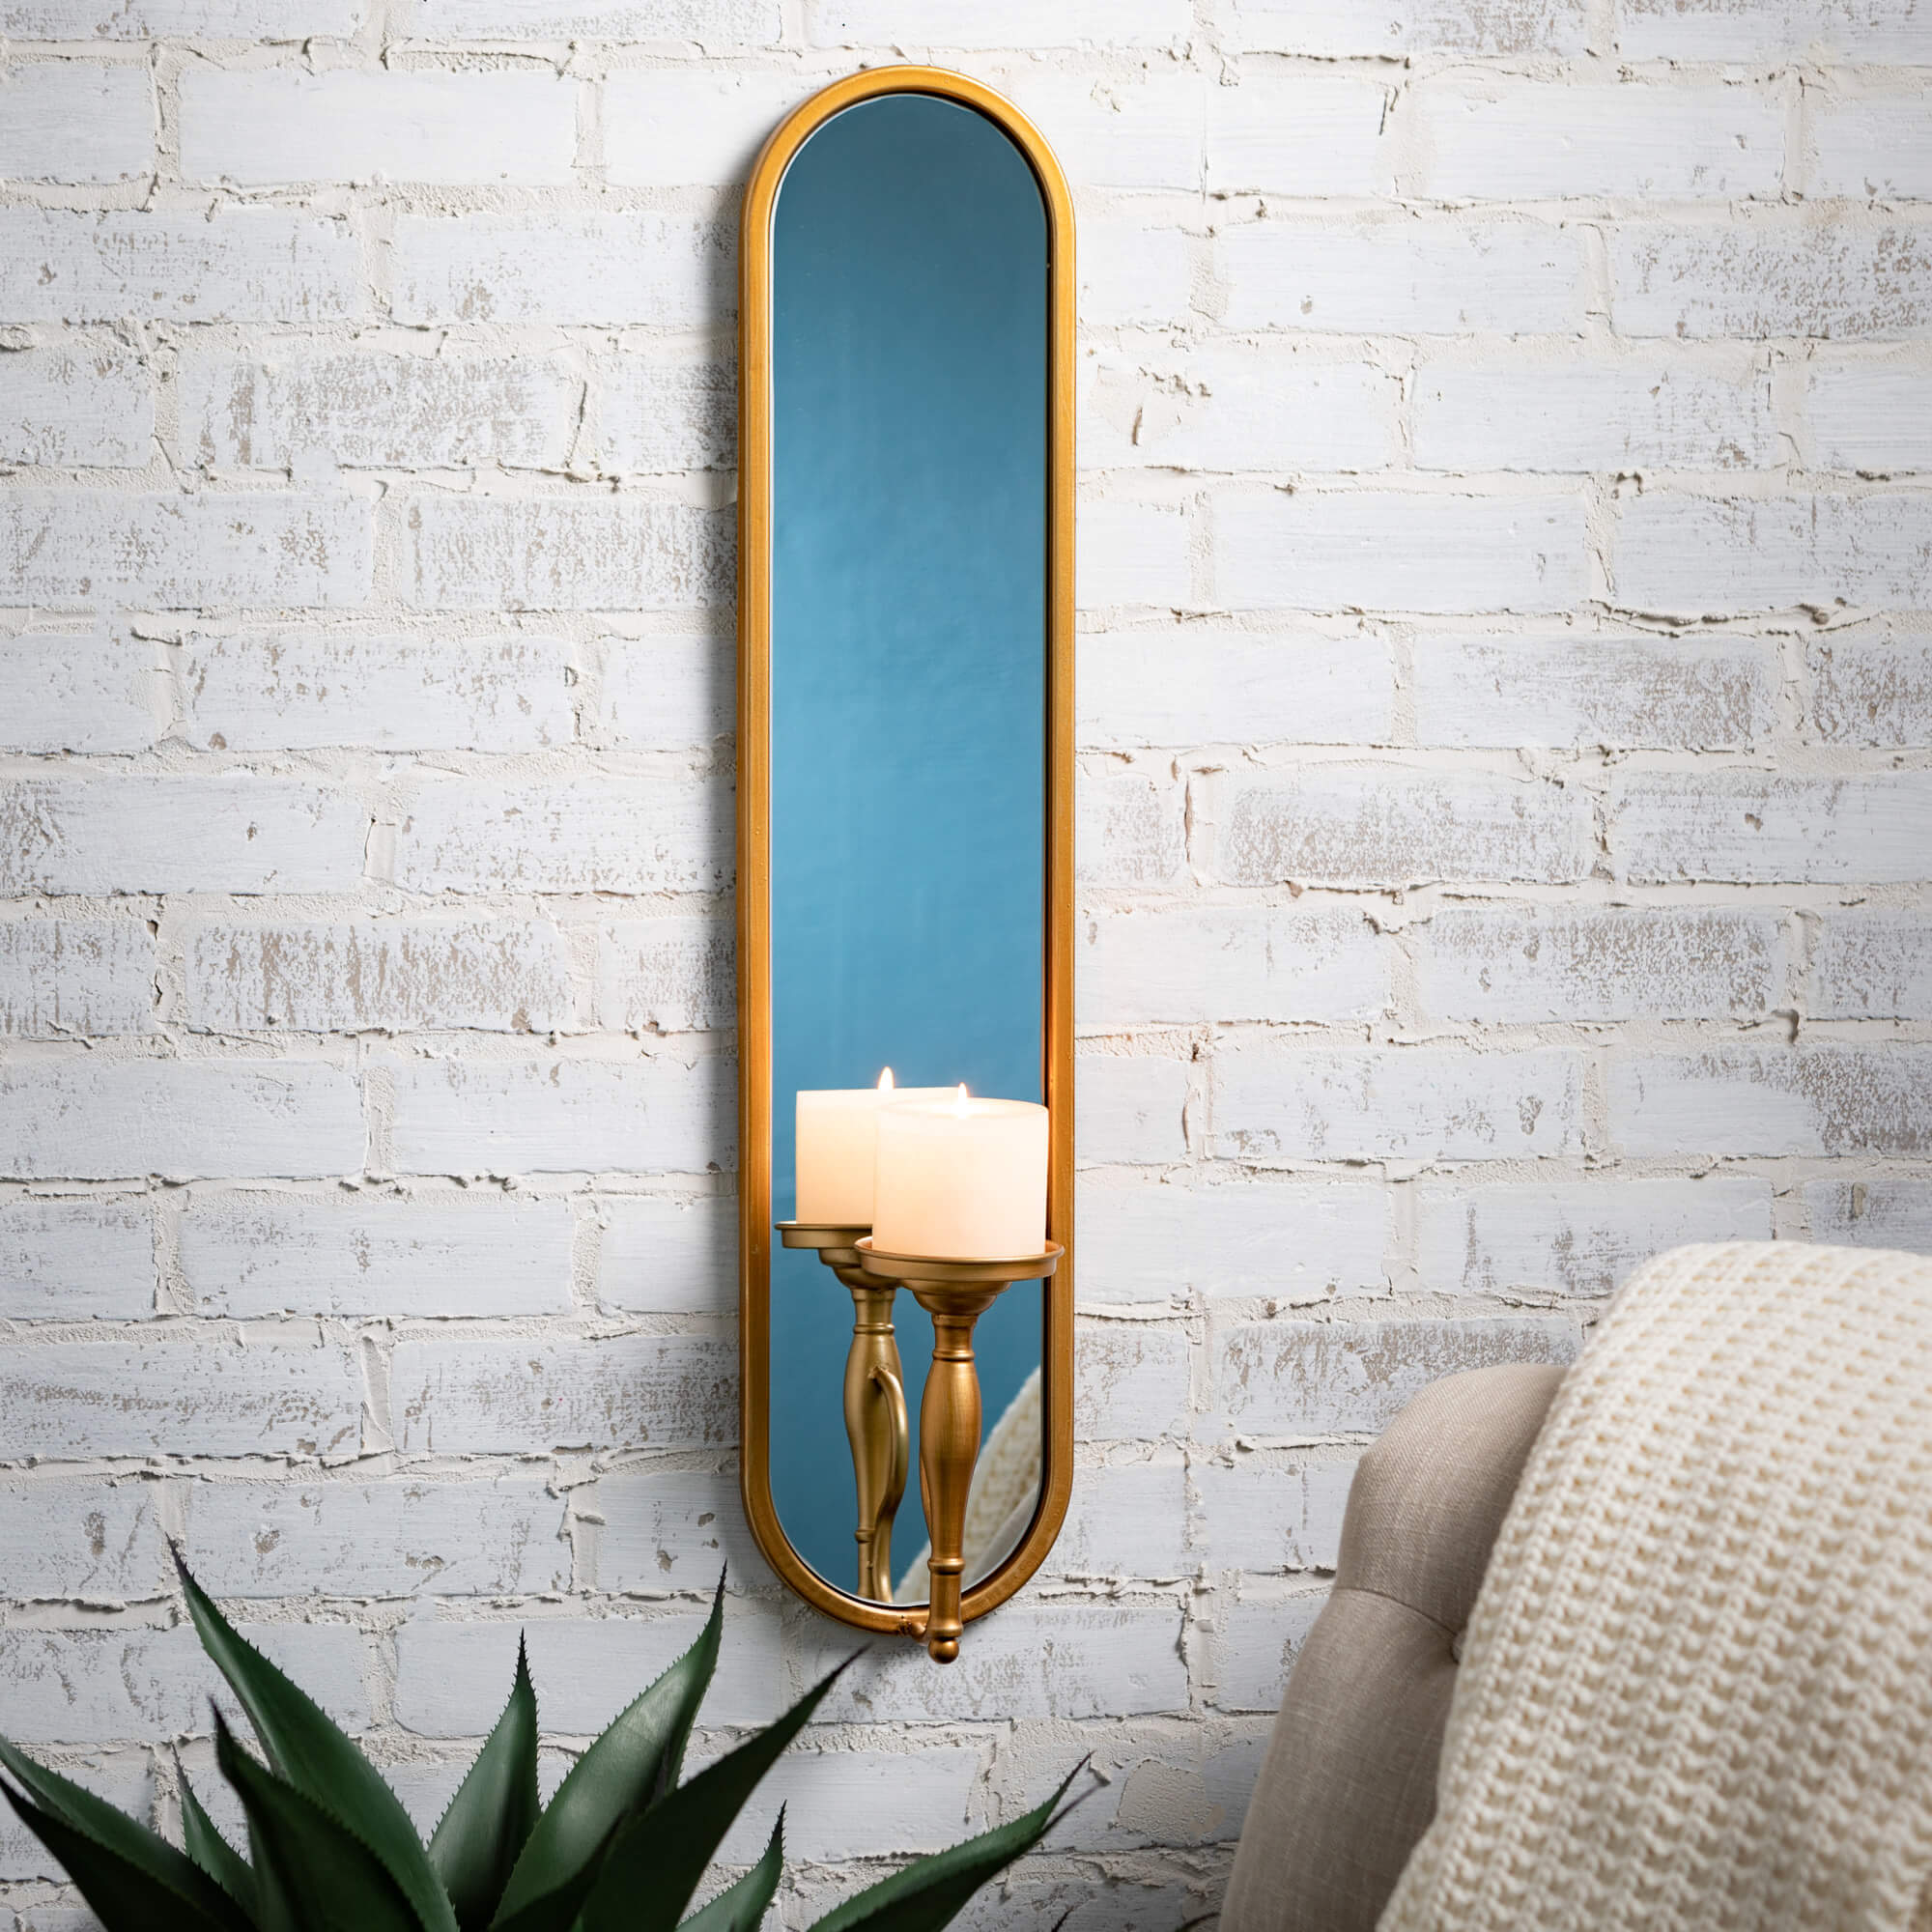 Oblong Mirrored Wall Sconce Elevate Home Decor - Sconces